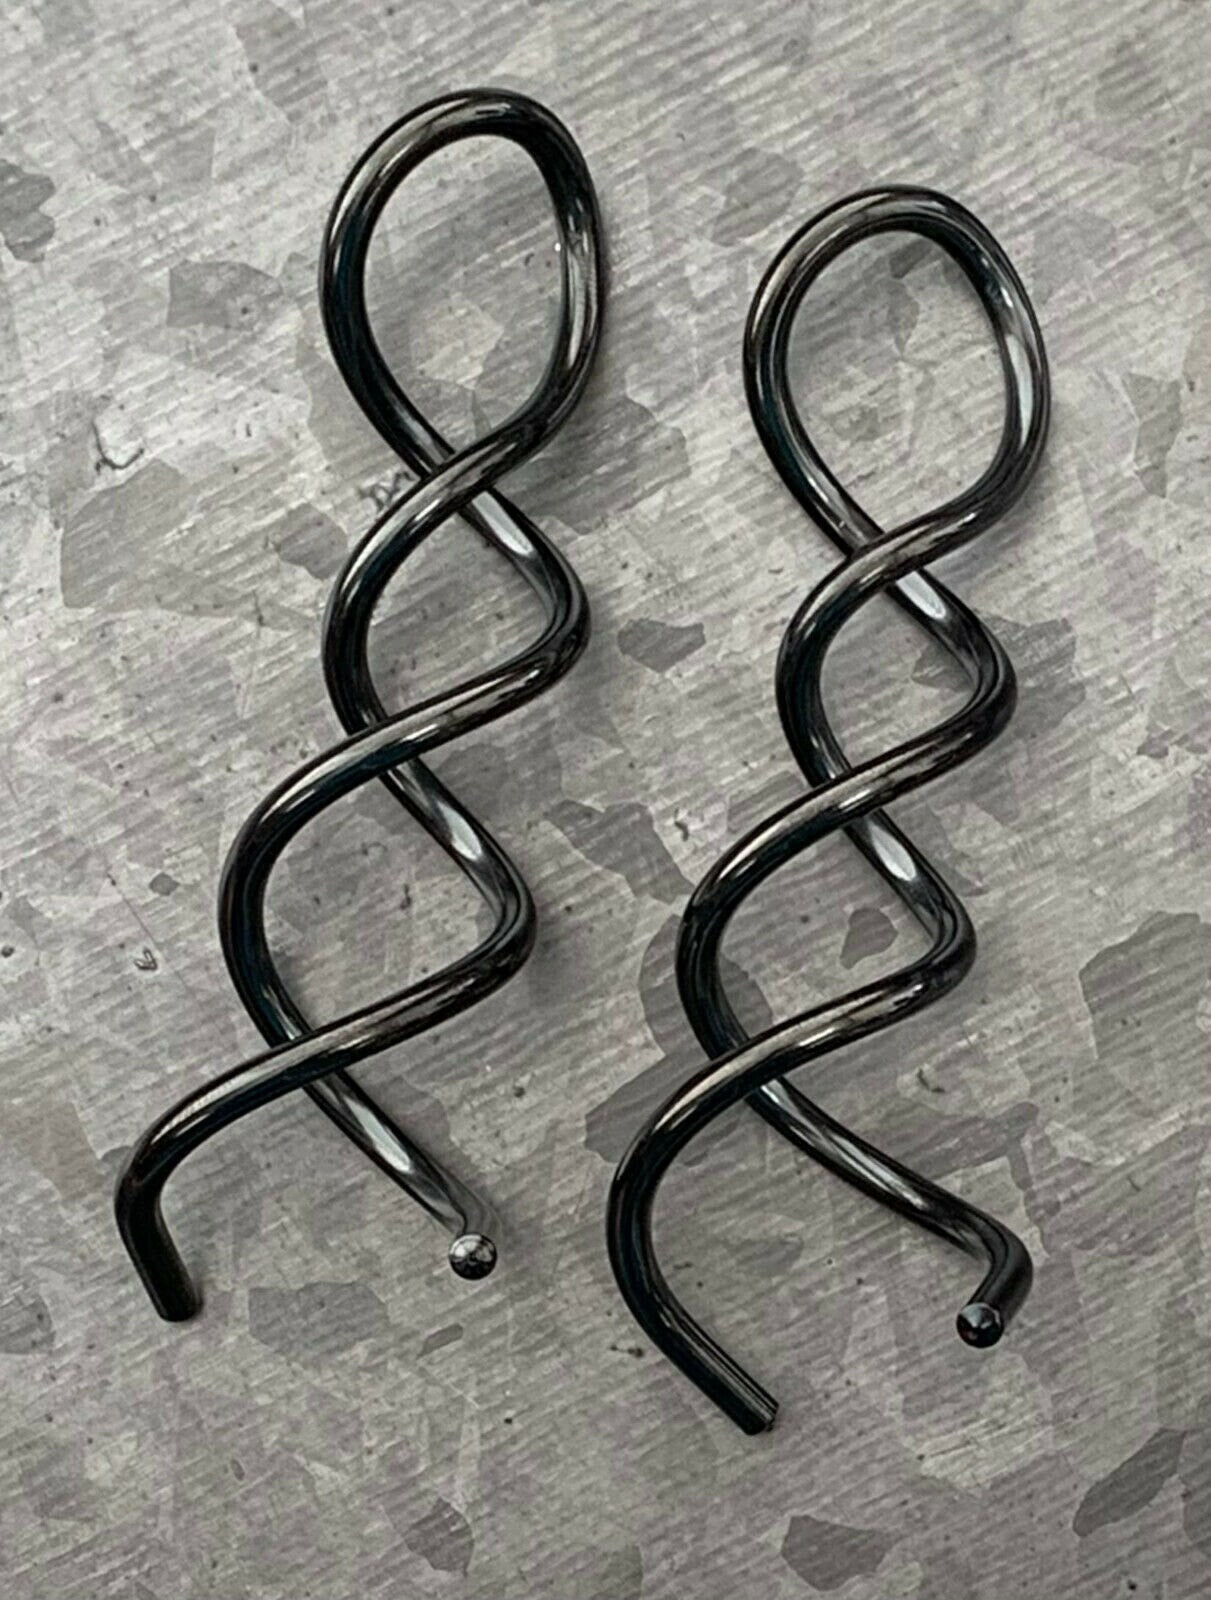 PAIR of Beautiful Black 316L Surgical Steel Twist Tail Hanging Tapers / Plugs - Expanders - Gauges 16g (1.3mm) thru 8g (3mm) available!